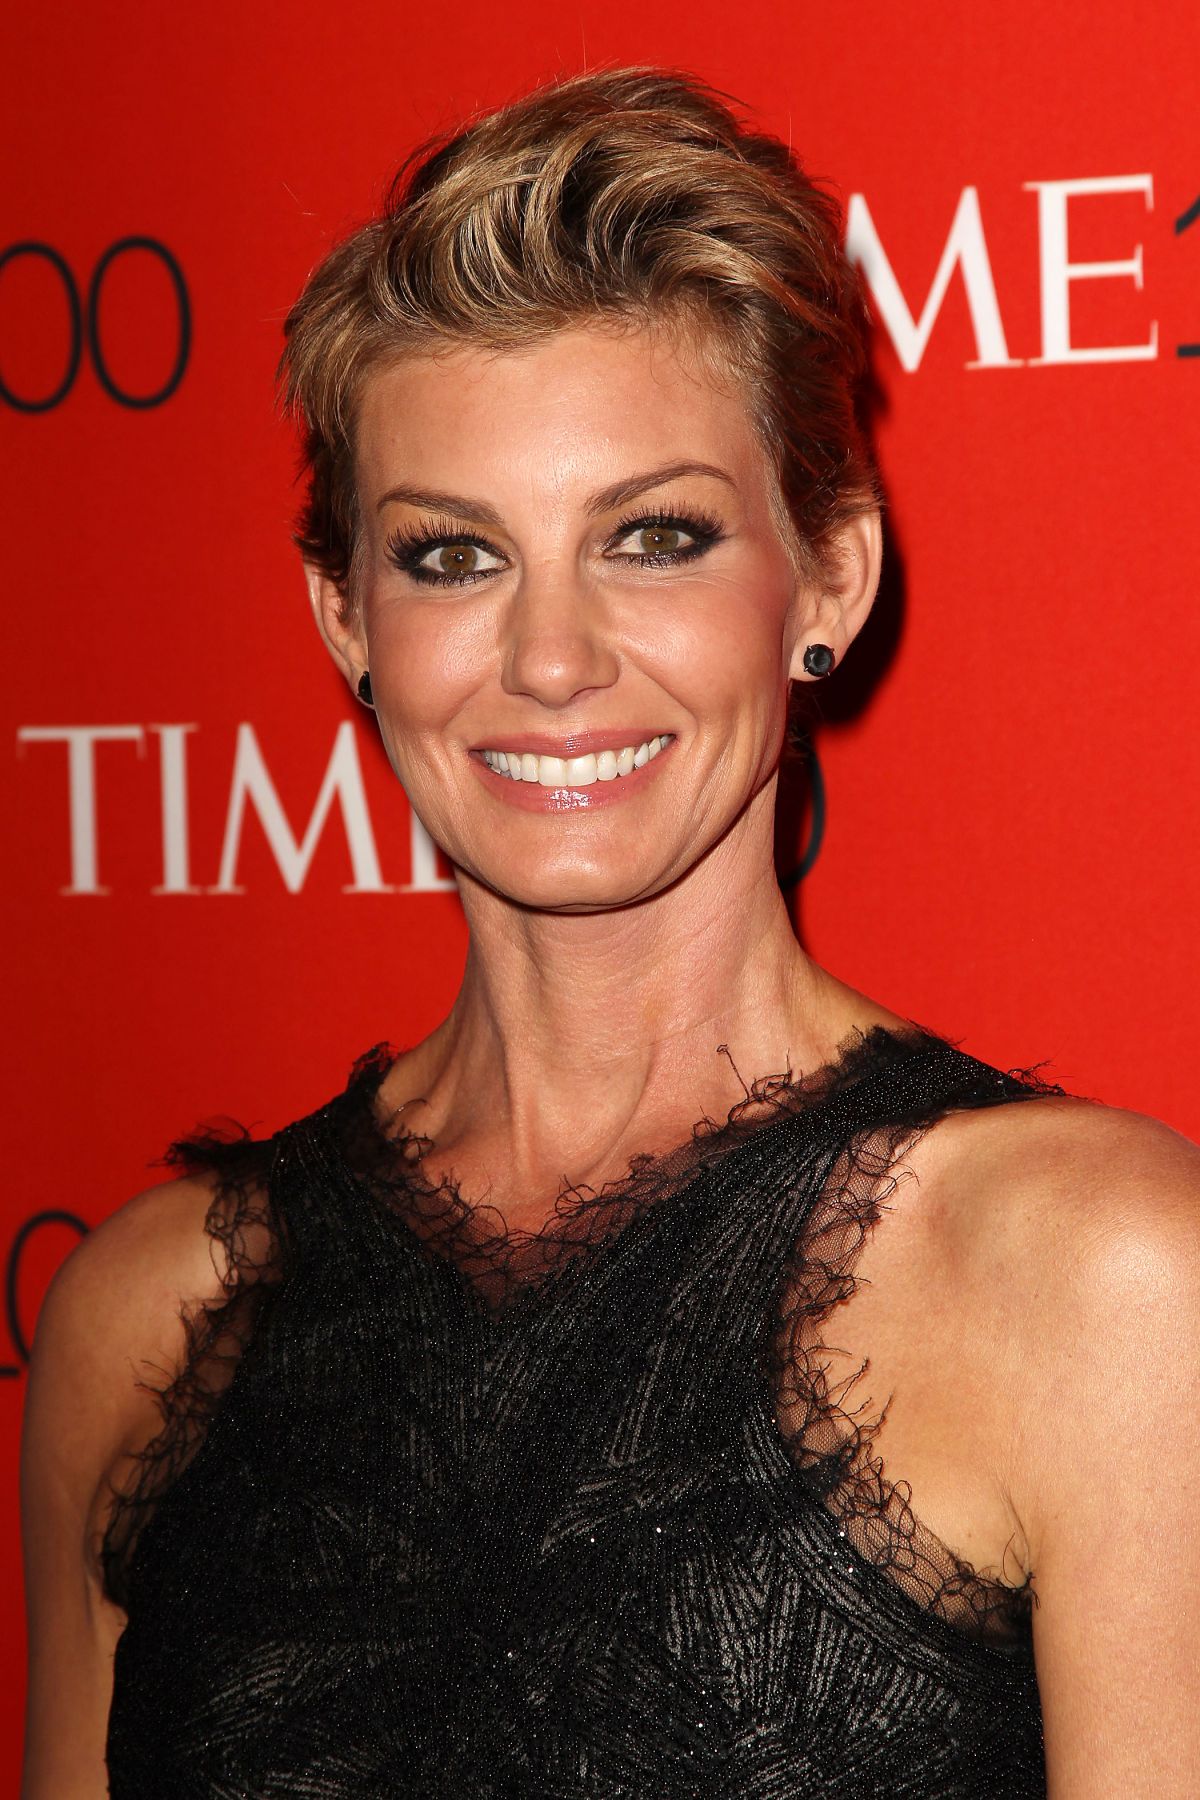 faith hill at Time 100 Gala in New York